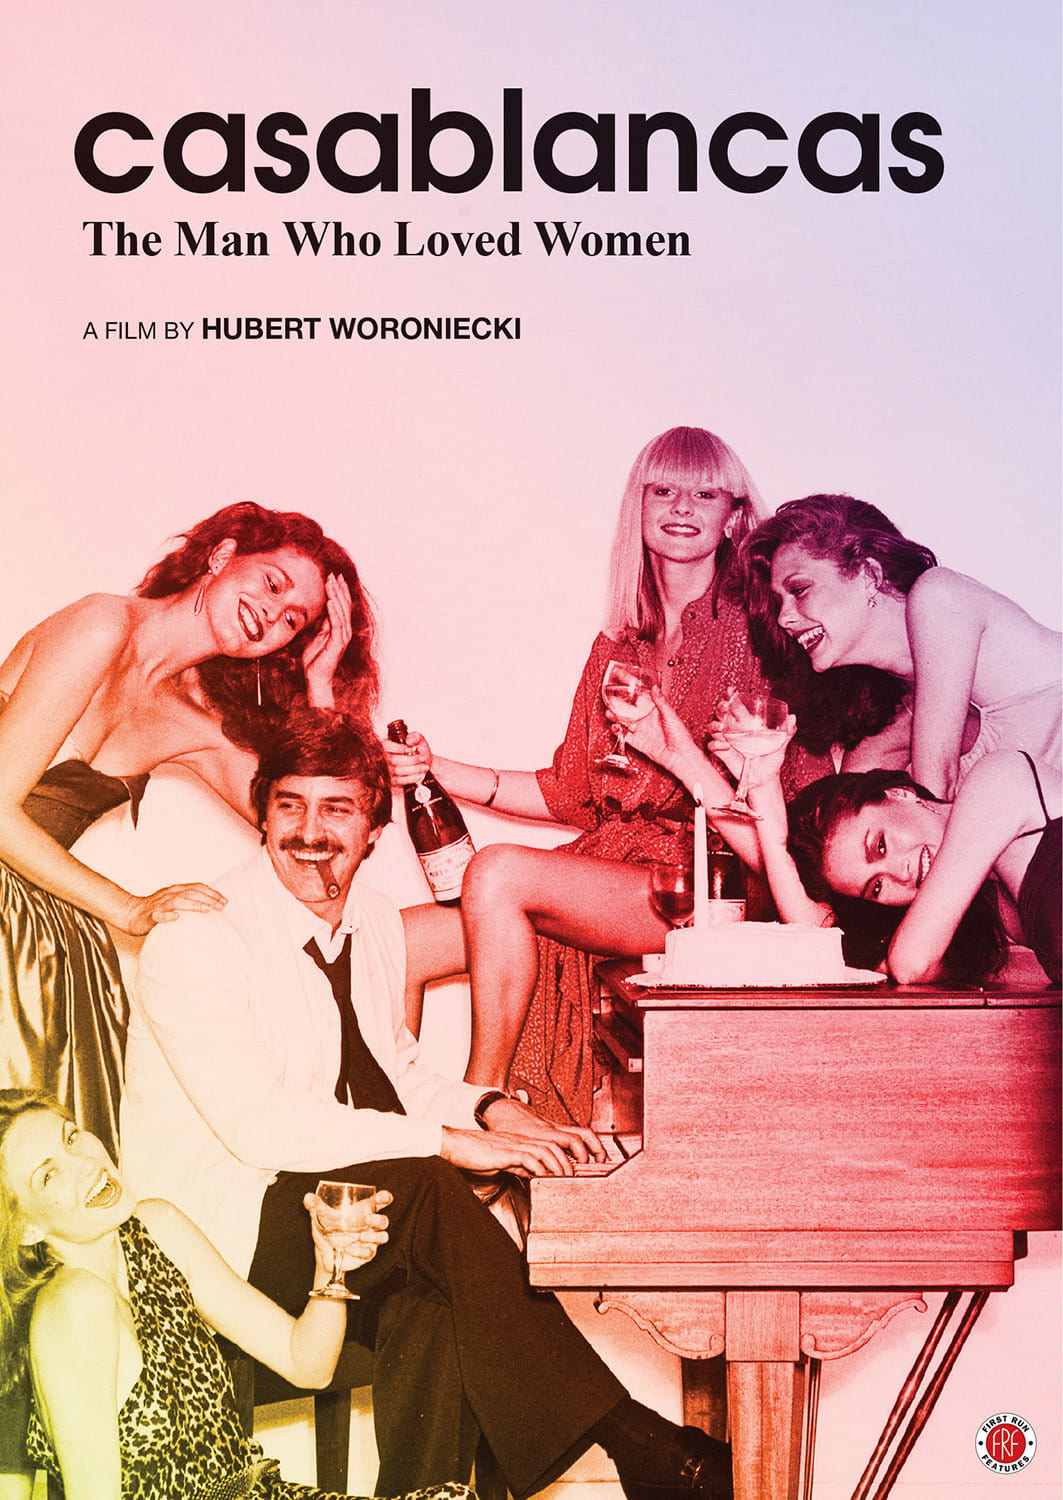 Casablancas: The Man Who Loved Women (2016)